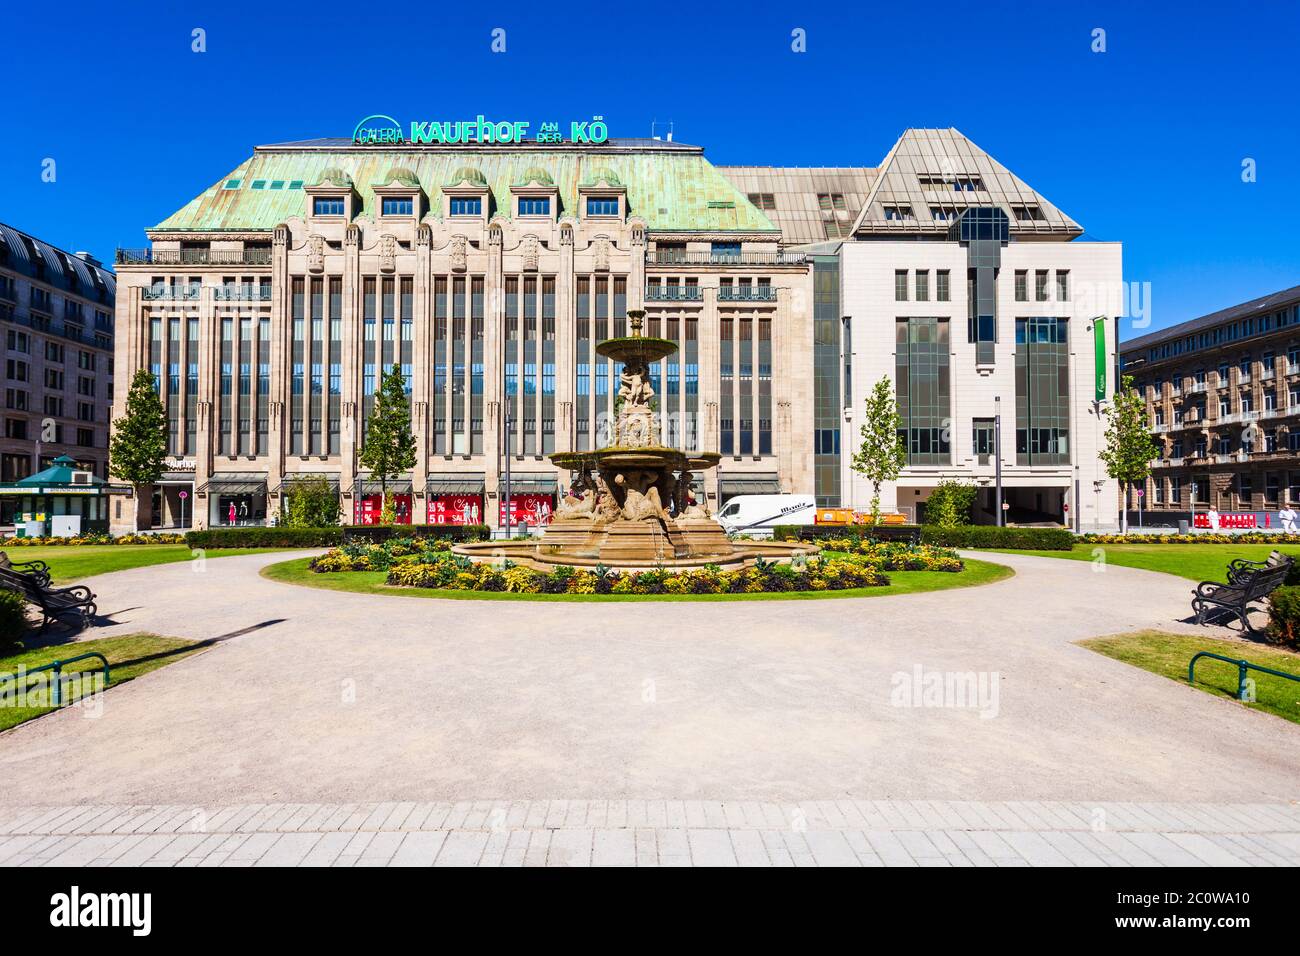 Galeria kaufhof gmbh hi-res stock photography and images - Alamy